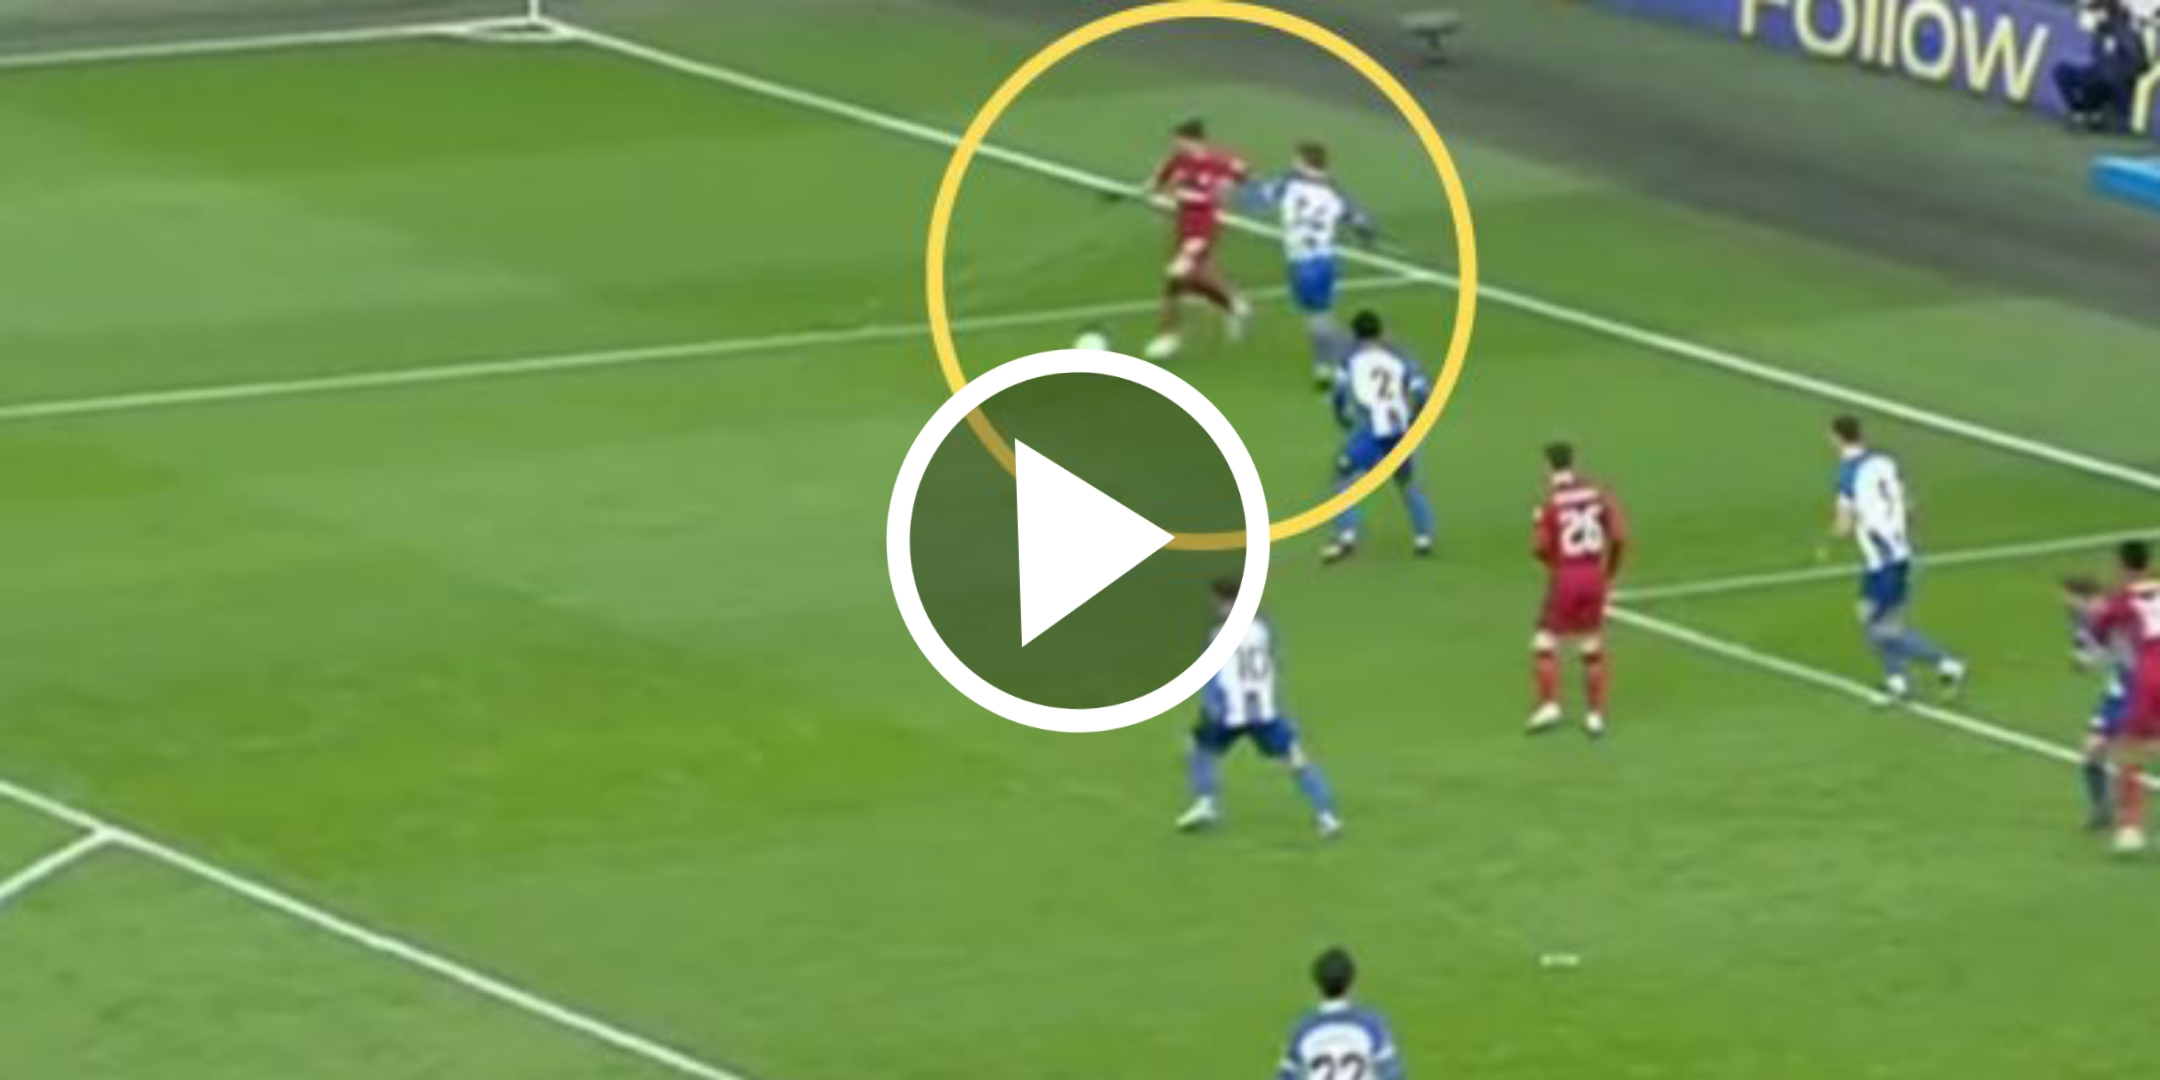 (Video) Watch Darwin Nunez’s Brighton highlights as the Uruguayan impresses and continues his return from injury 13 Sportelo